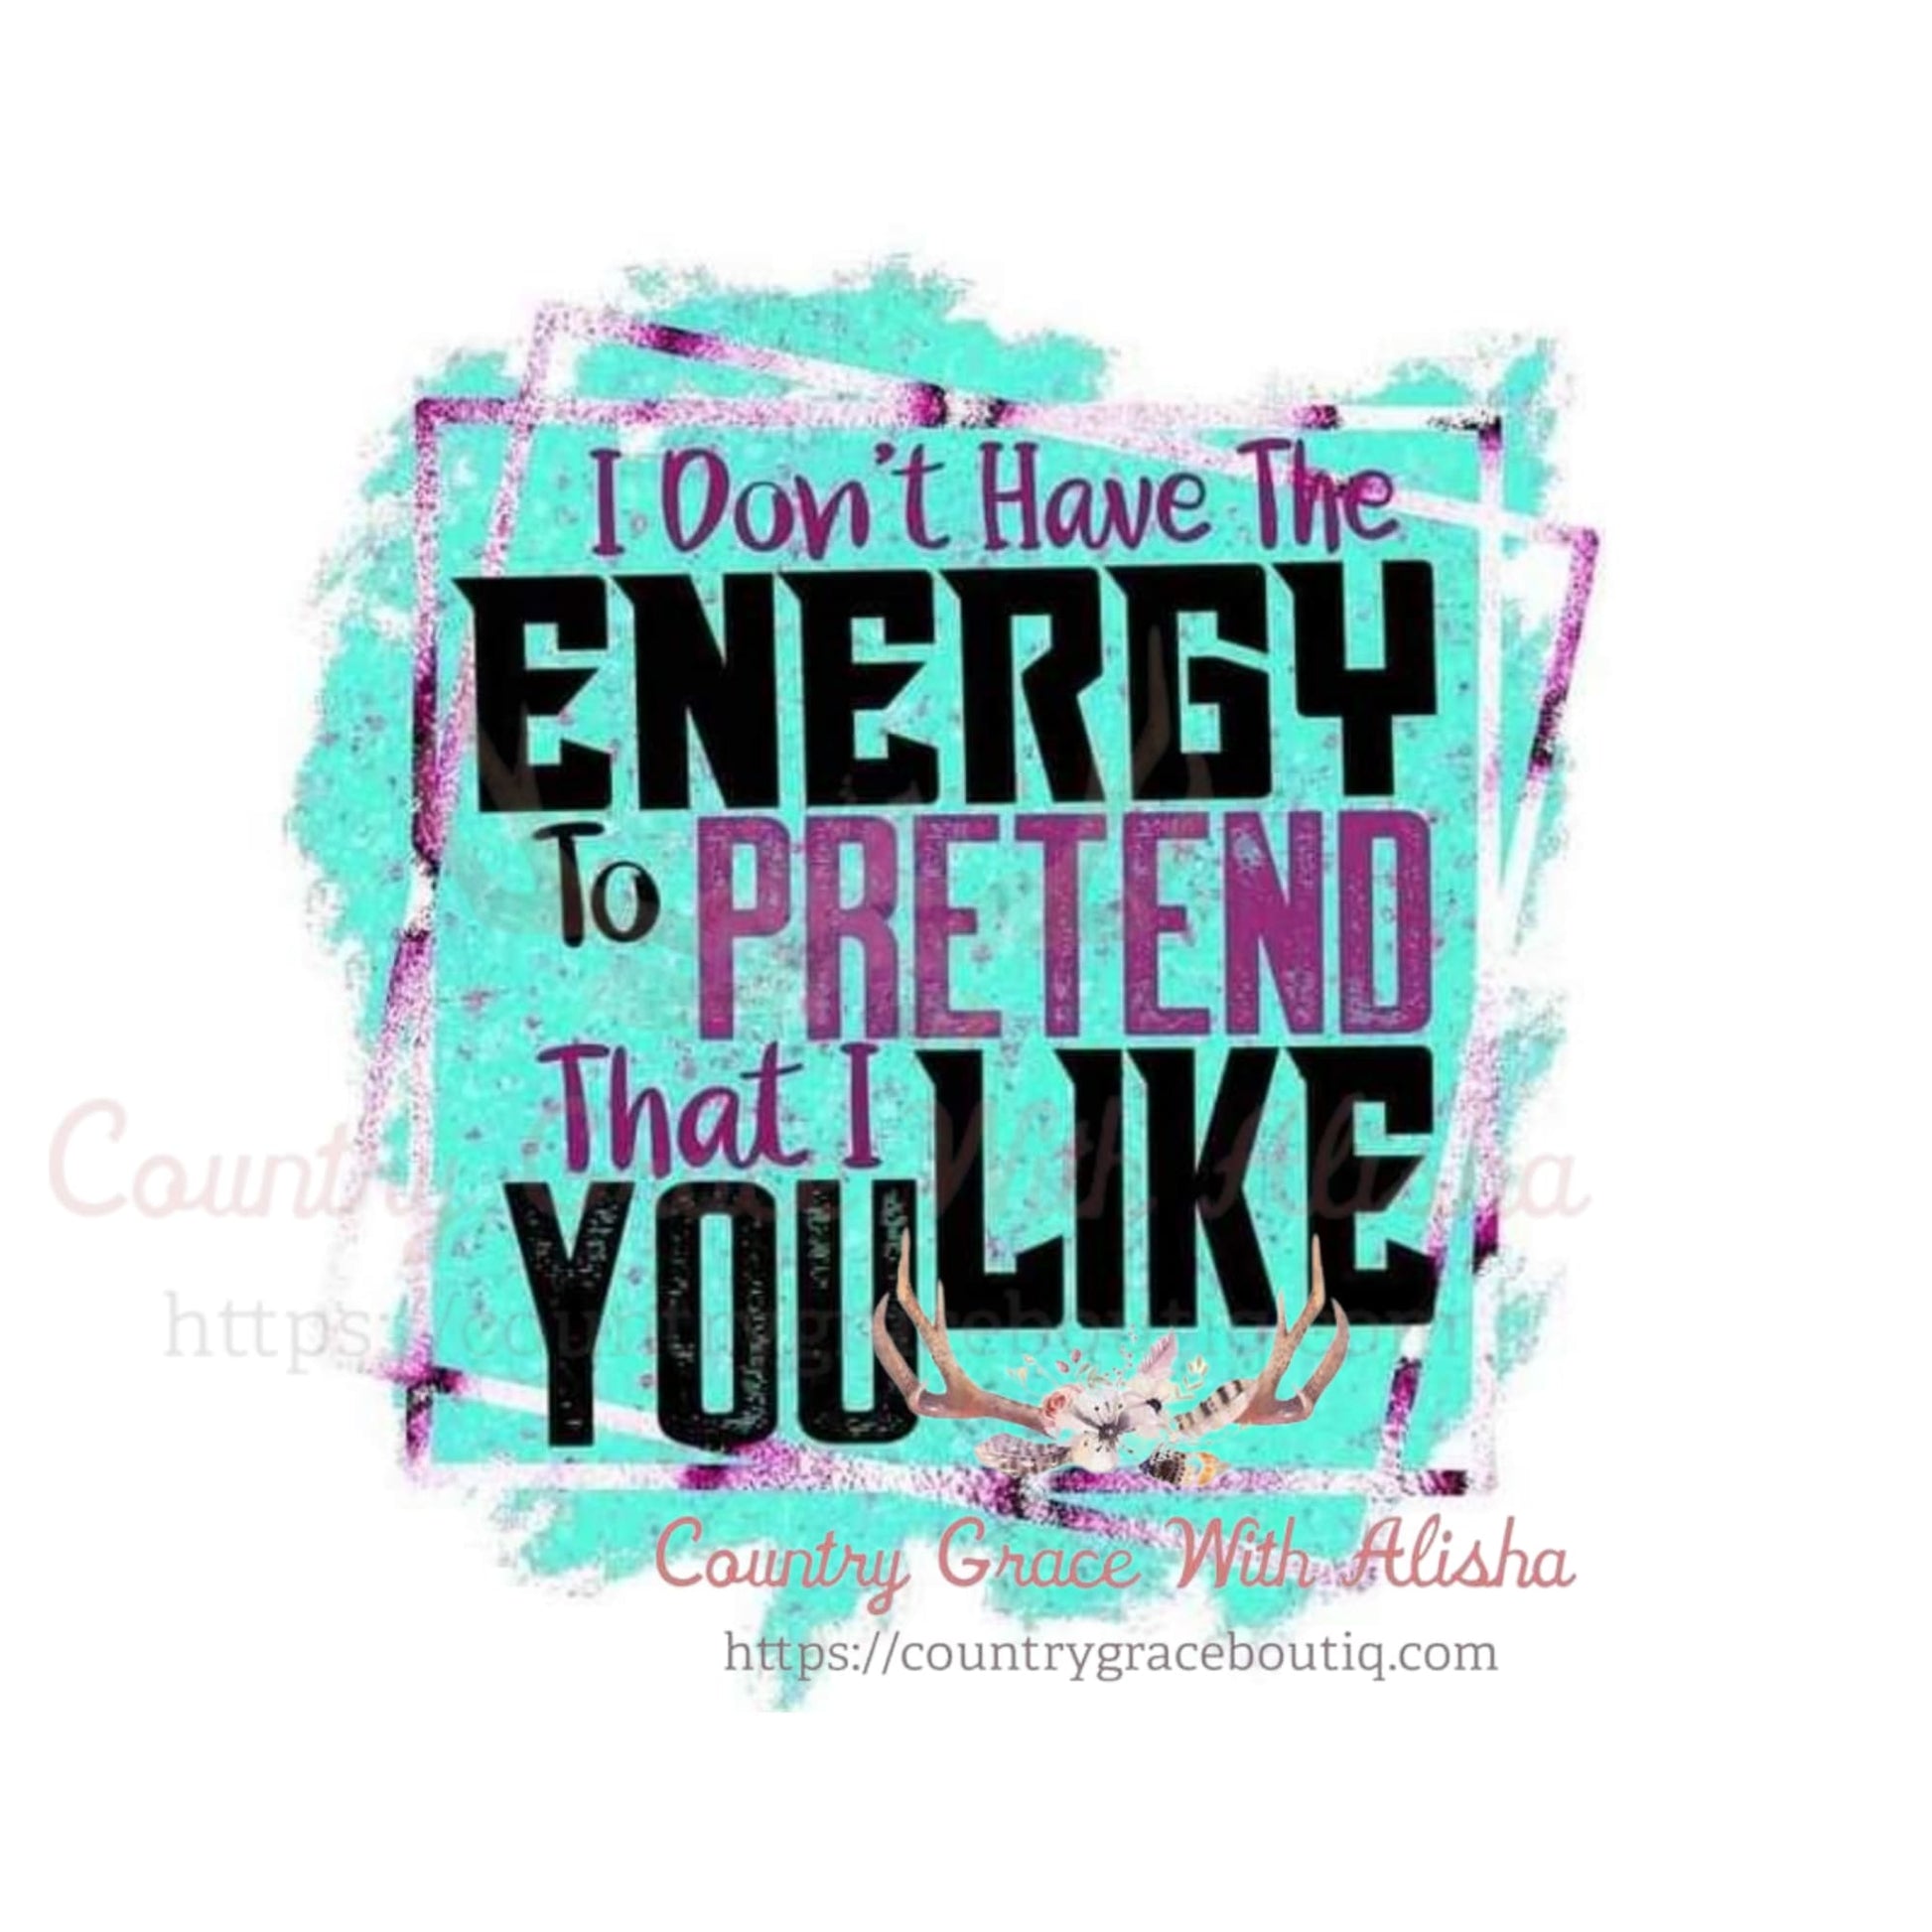 I Don’t Have The Energy Sublimation Transfer - Sub $1.50 